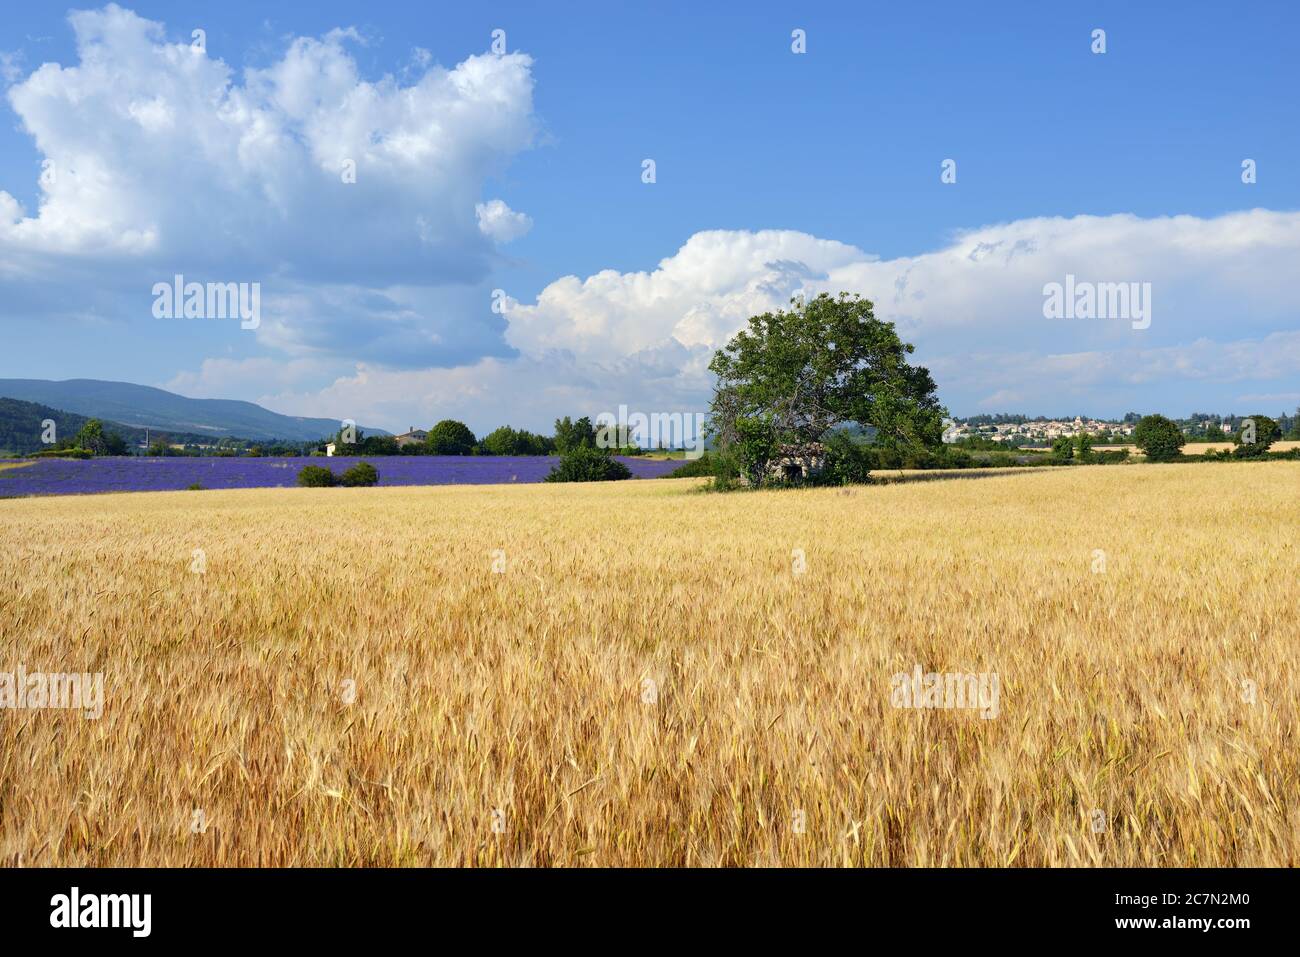 Stunning landscape with wheat field with big green tree in the center, lavender field and medieval village of Sault on background. Plateau of Sault, P Stock Photo